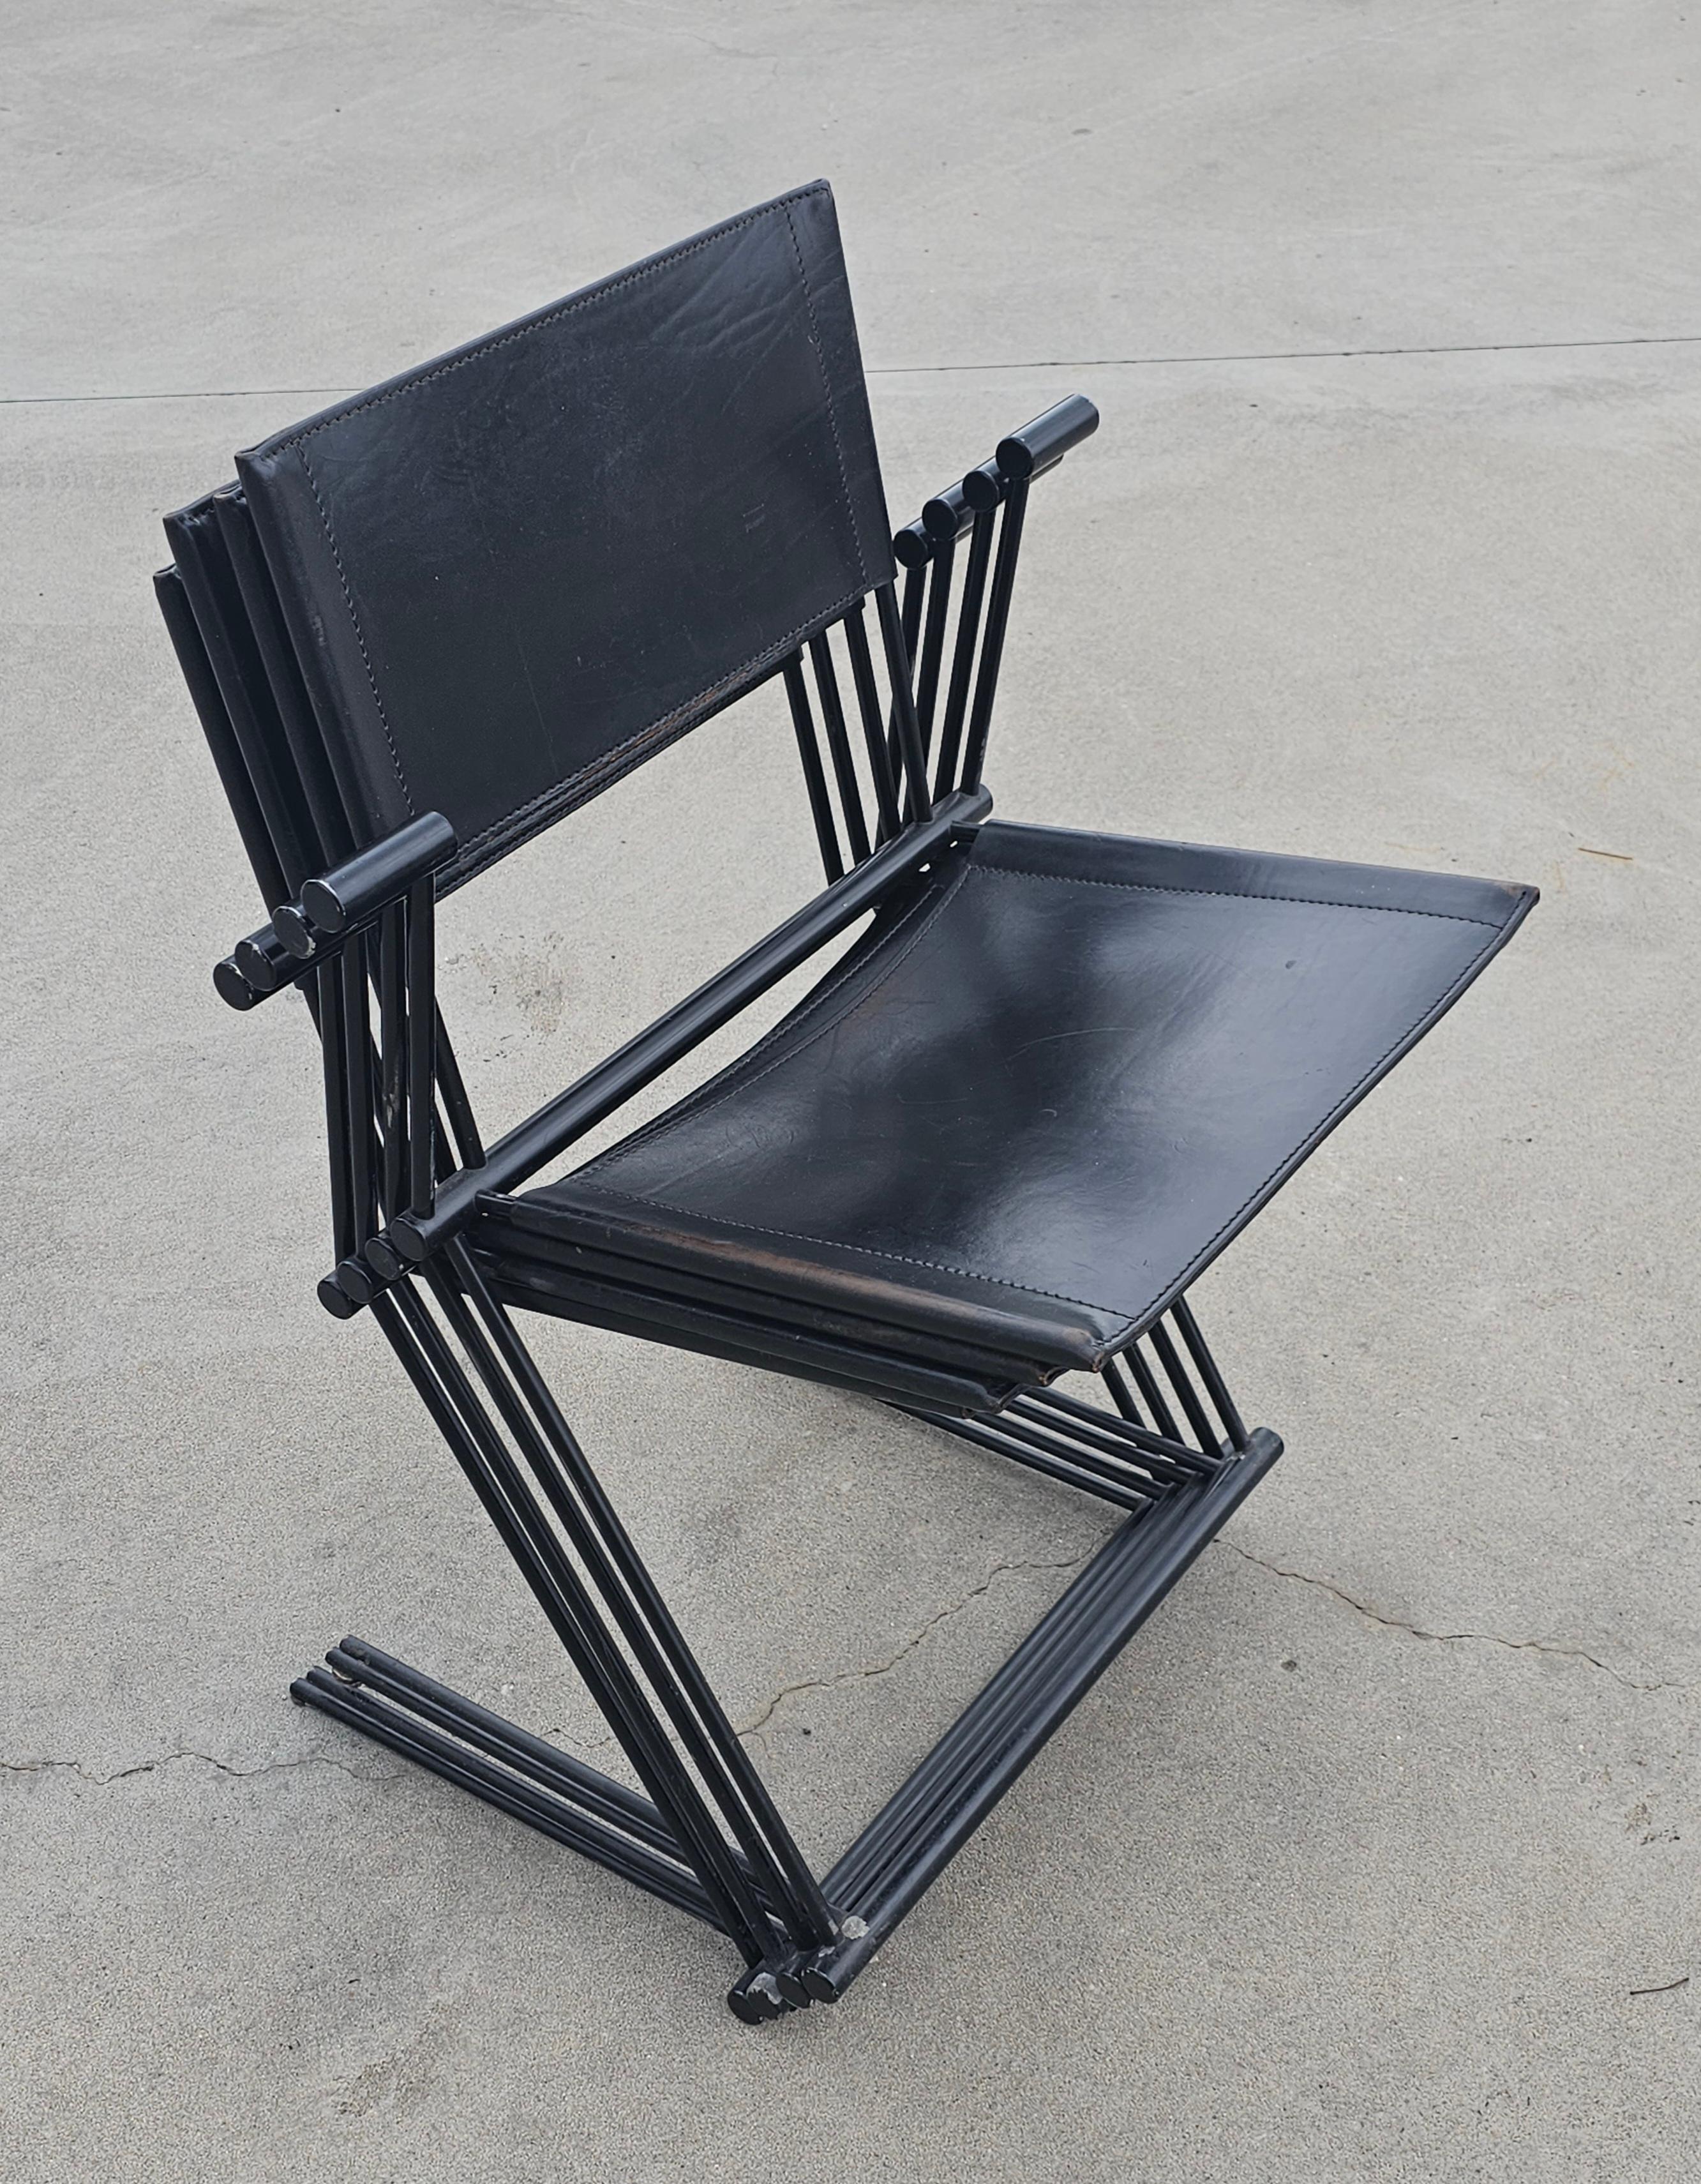 In this listing you will find a set of 4 Ballerina Dining Chairs designed by Herbert Ohl for Matteo Grassi. All chairs have manufacturer's stamp on the backrests. The cantilever chairs are made of black lacquered spring steel, white the seats and